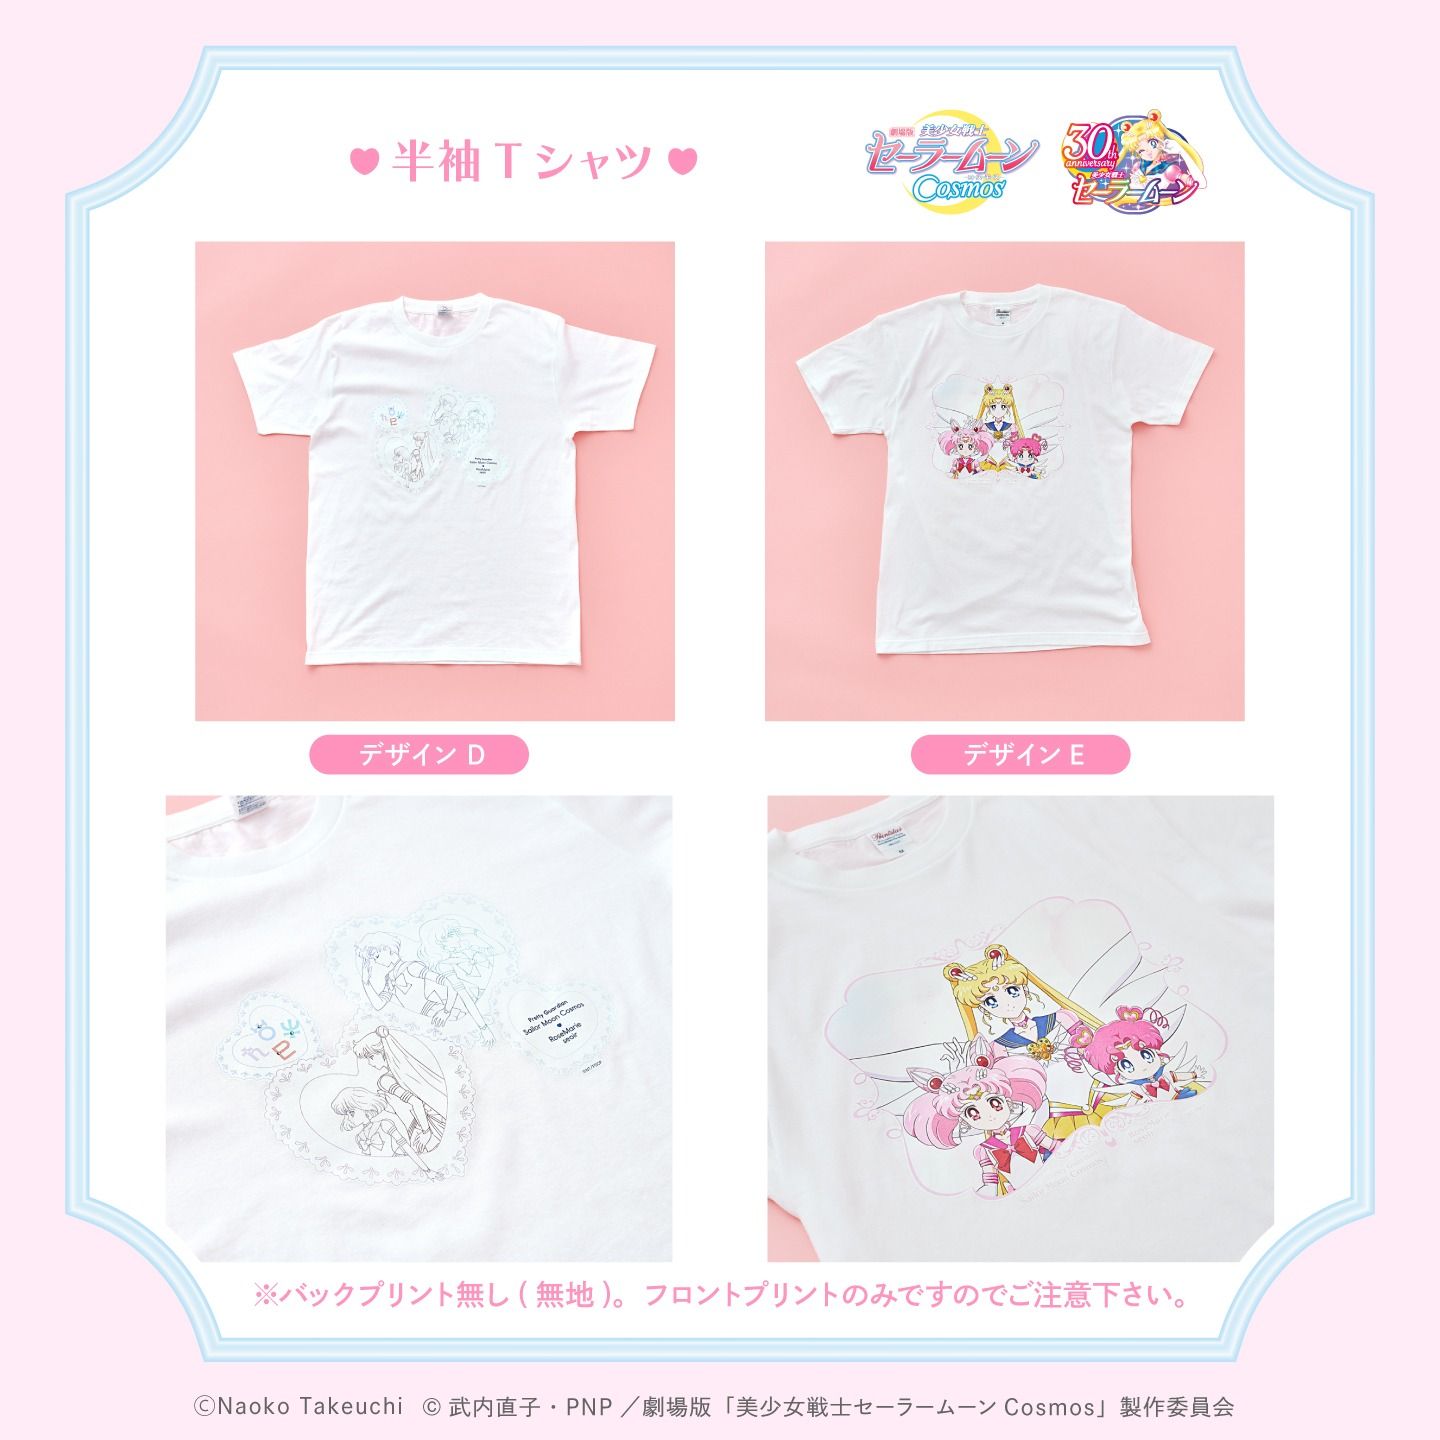 Sailor Moon Releases Brand-New Fashion Collection in Official Collaboration